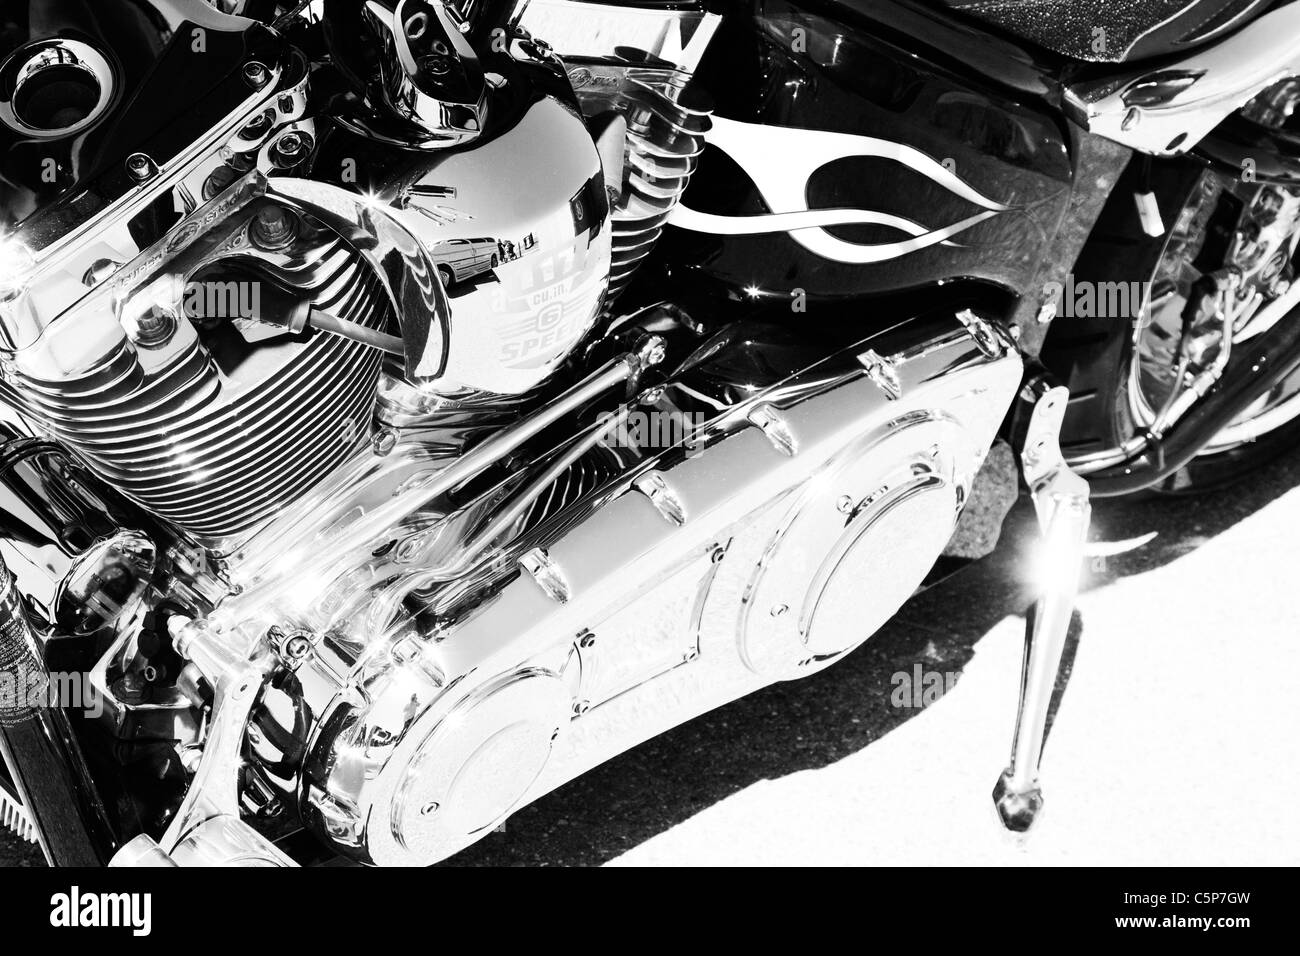 Chrome motorcycle engine cover Stock Photo